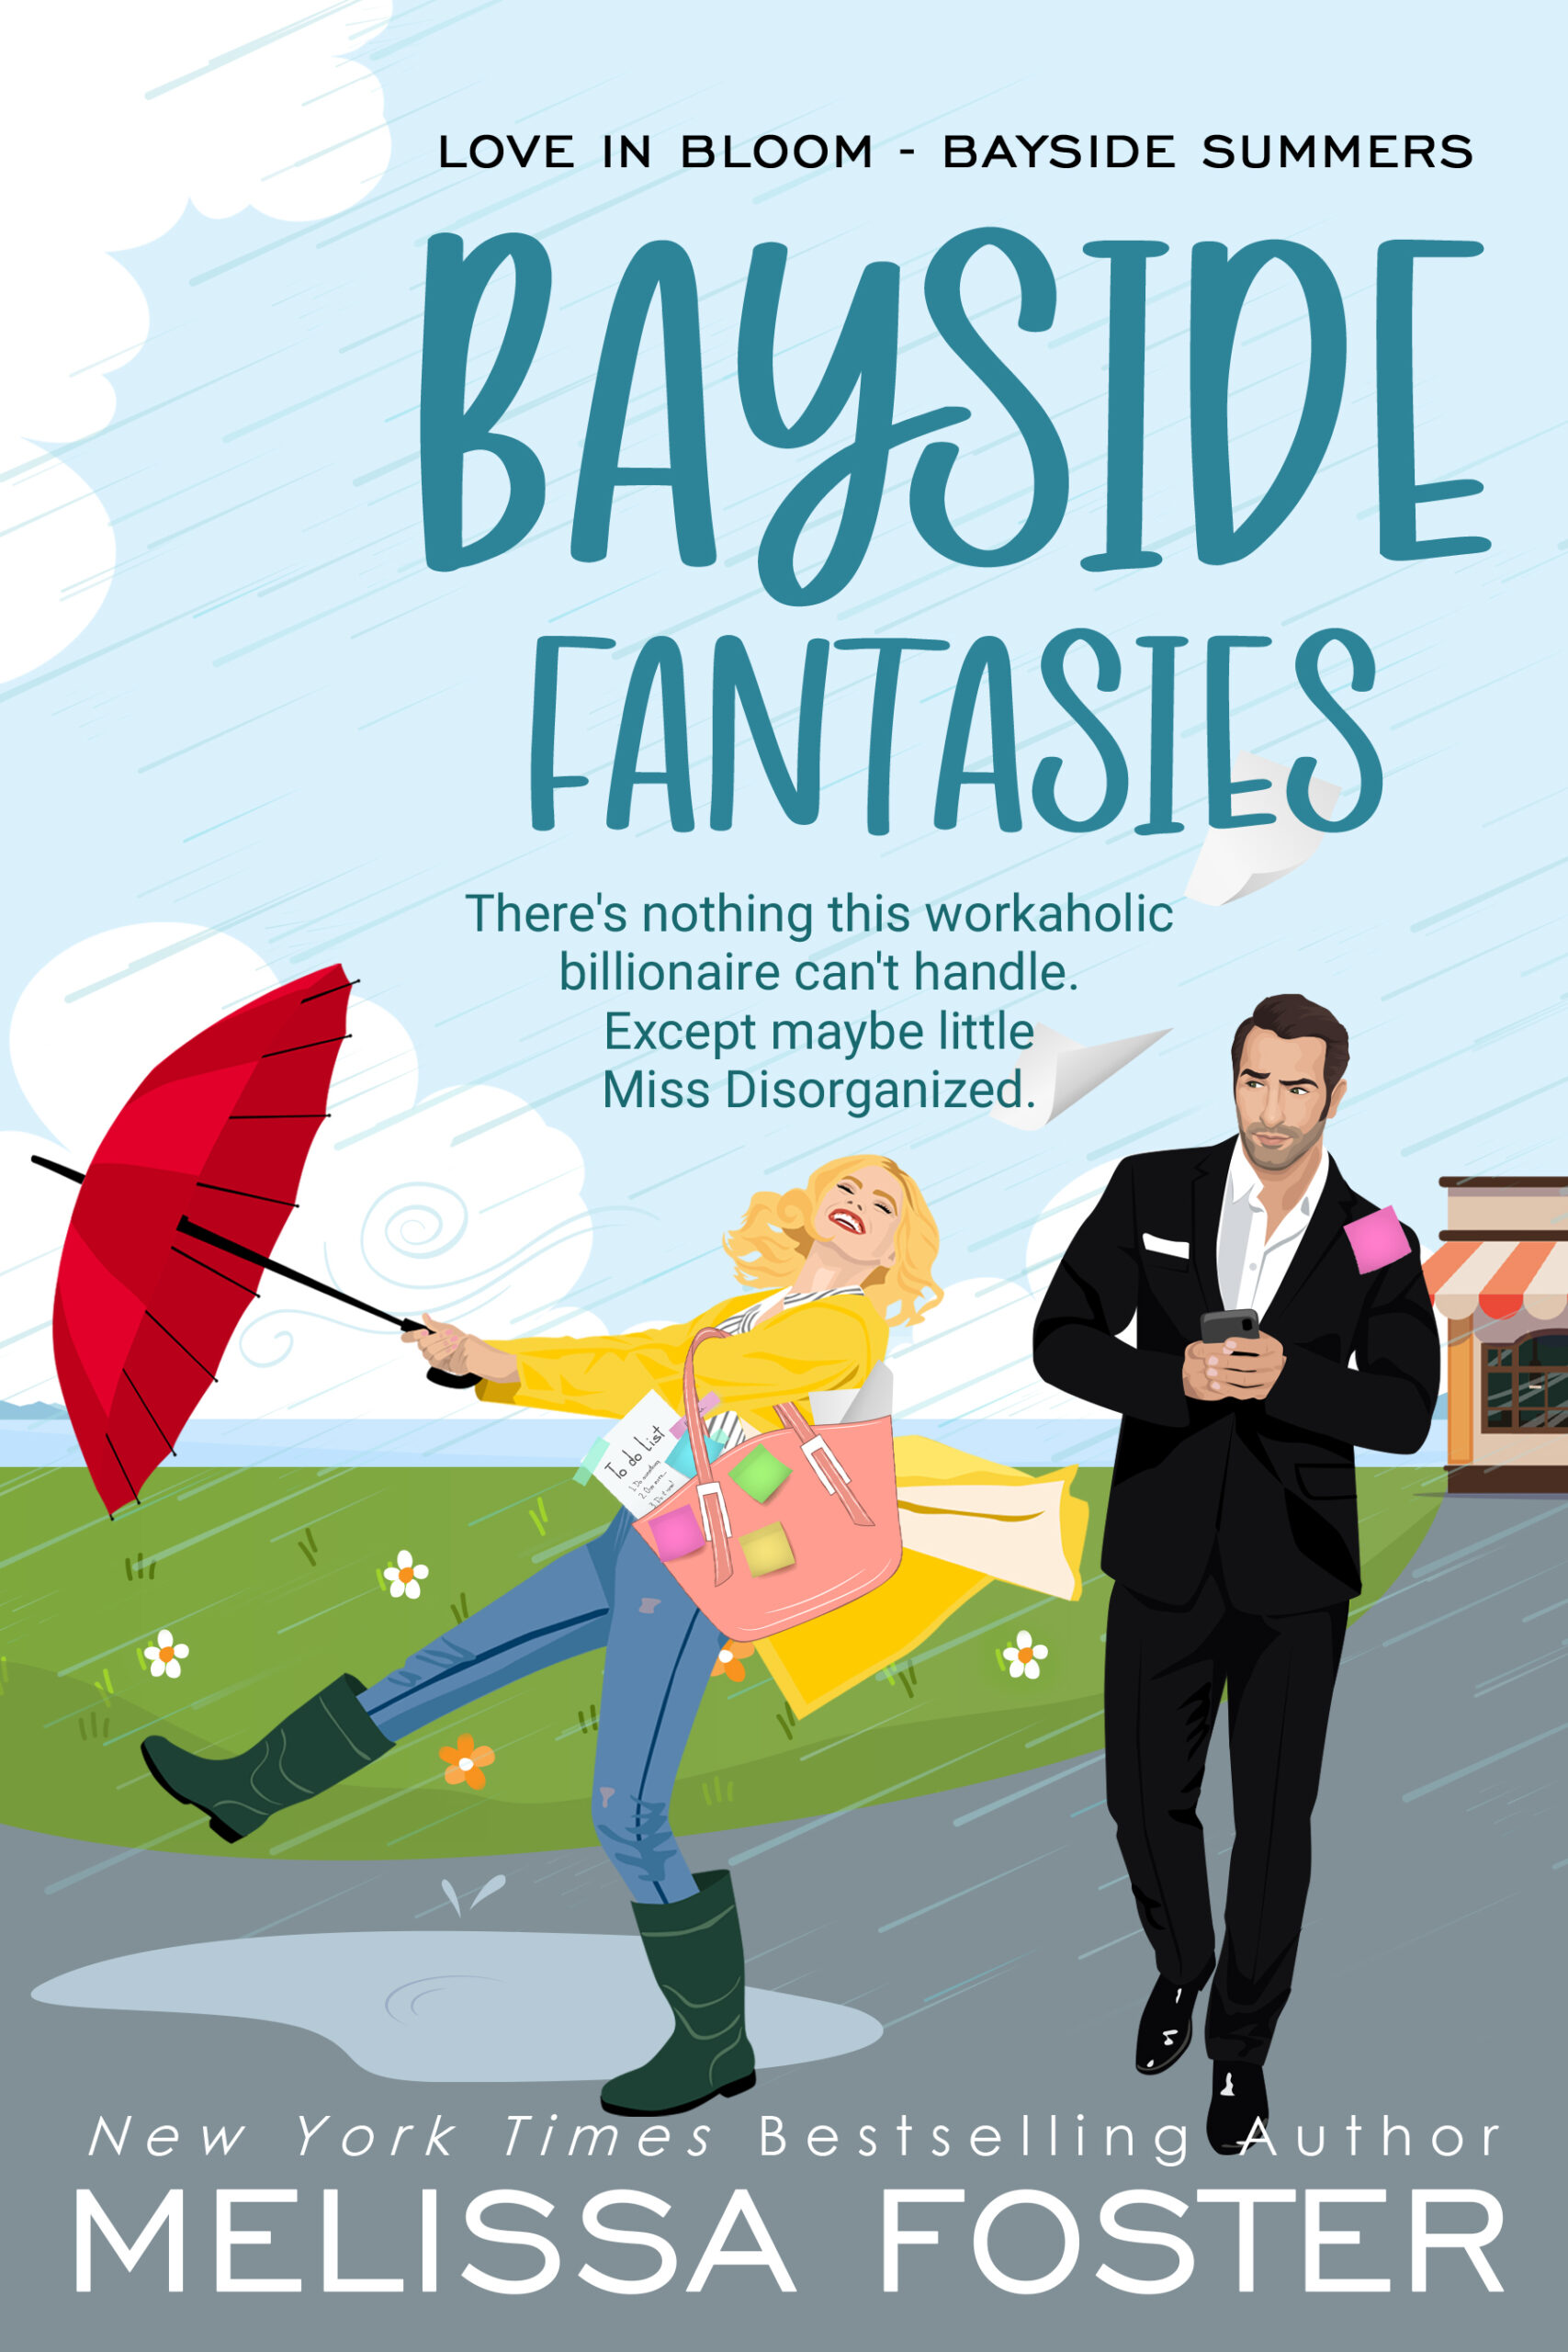 Bayside Fantasies - Special Edition by Melissa Foster